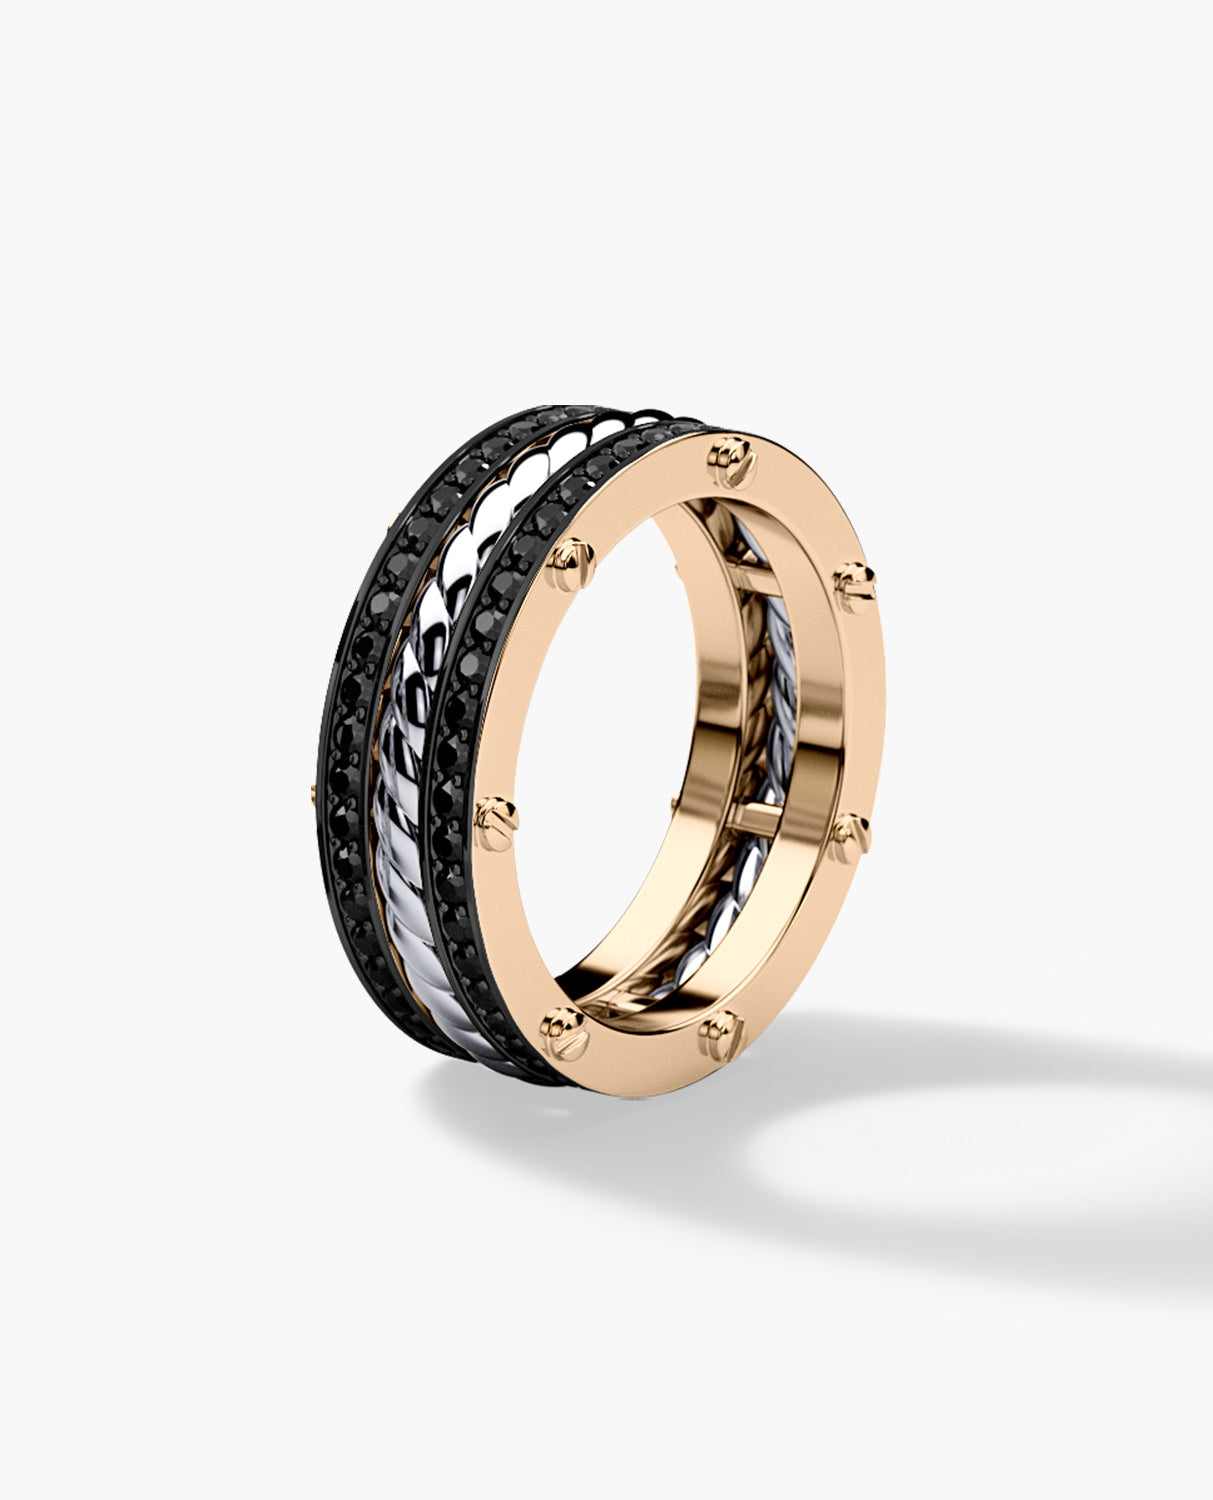 ROPES Two-Tone Gold Wedding Band with 0.70ct Black Diamonds - Ring 2